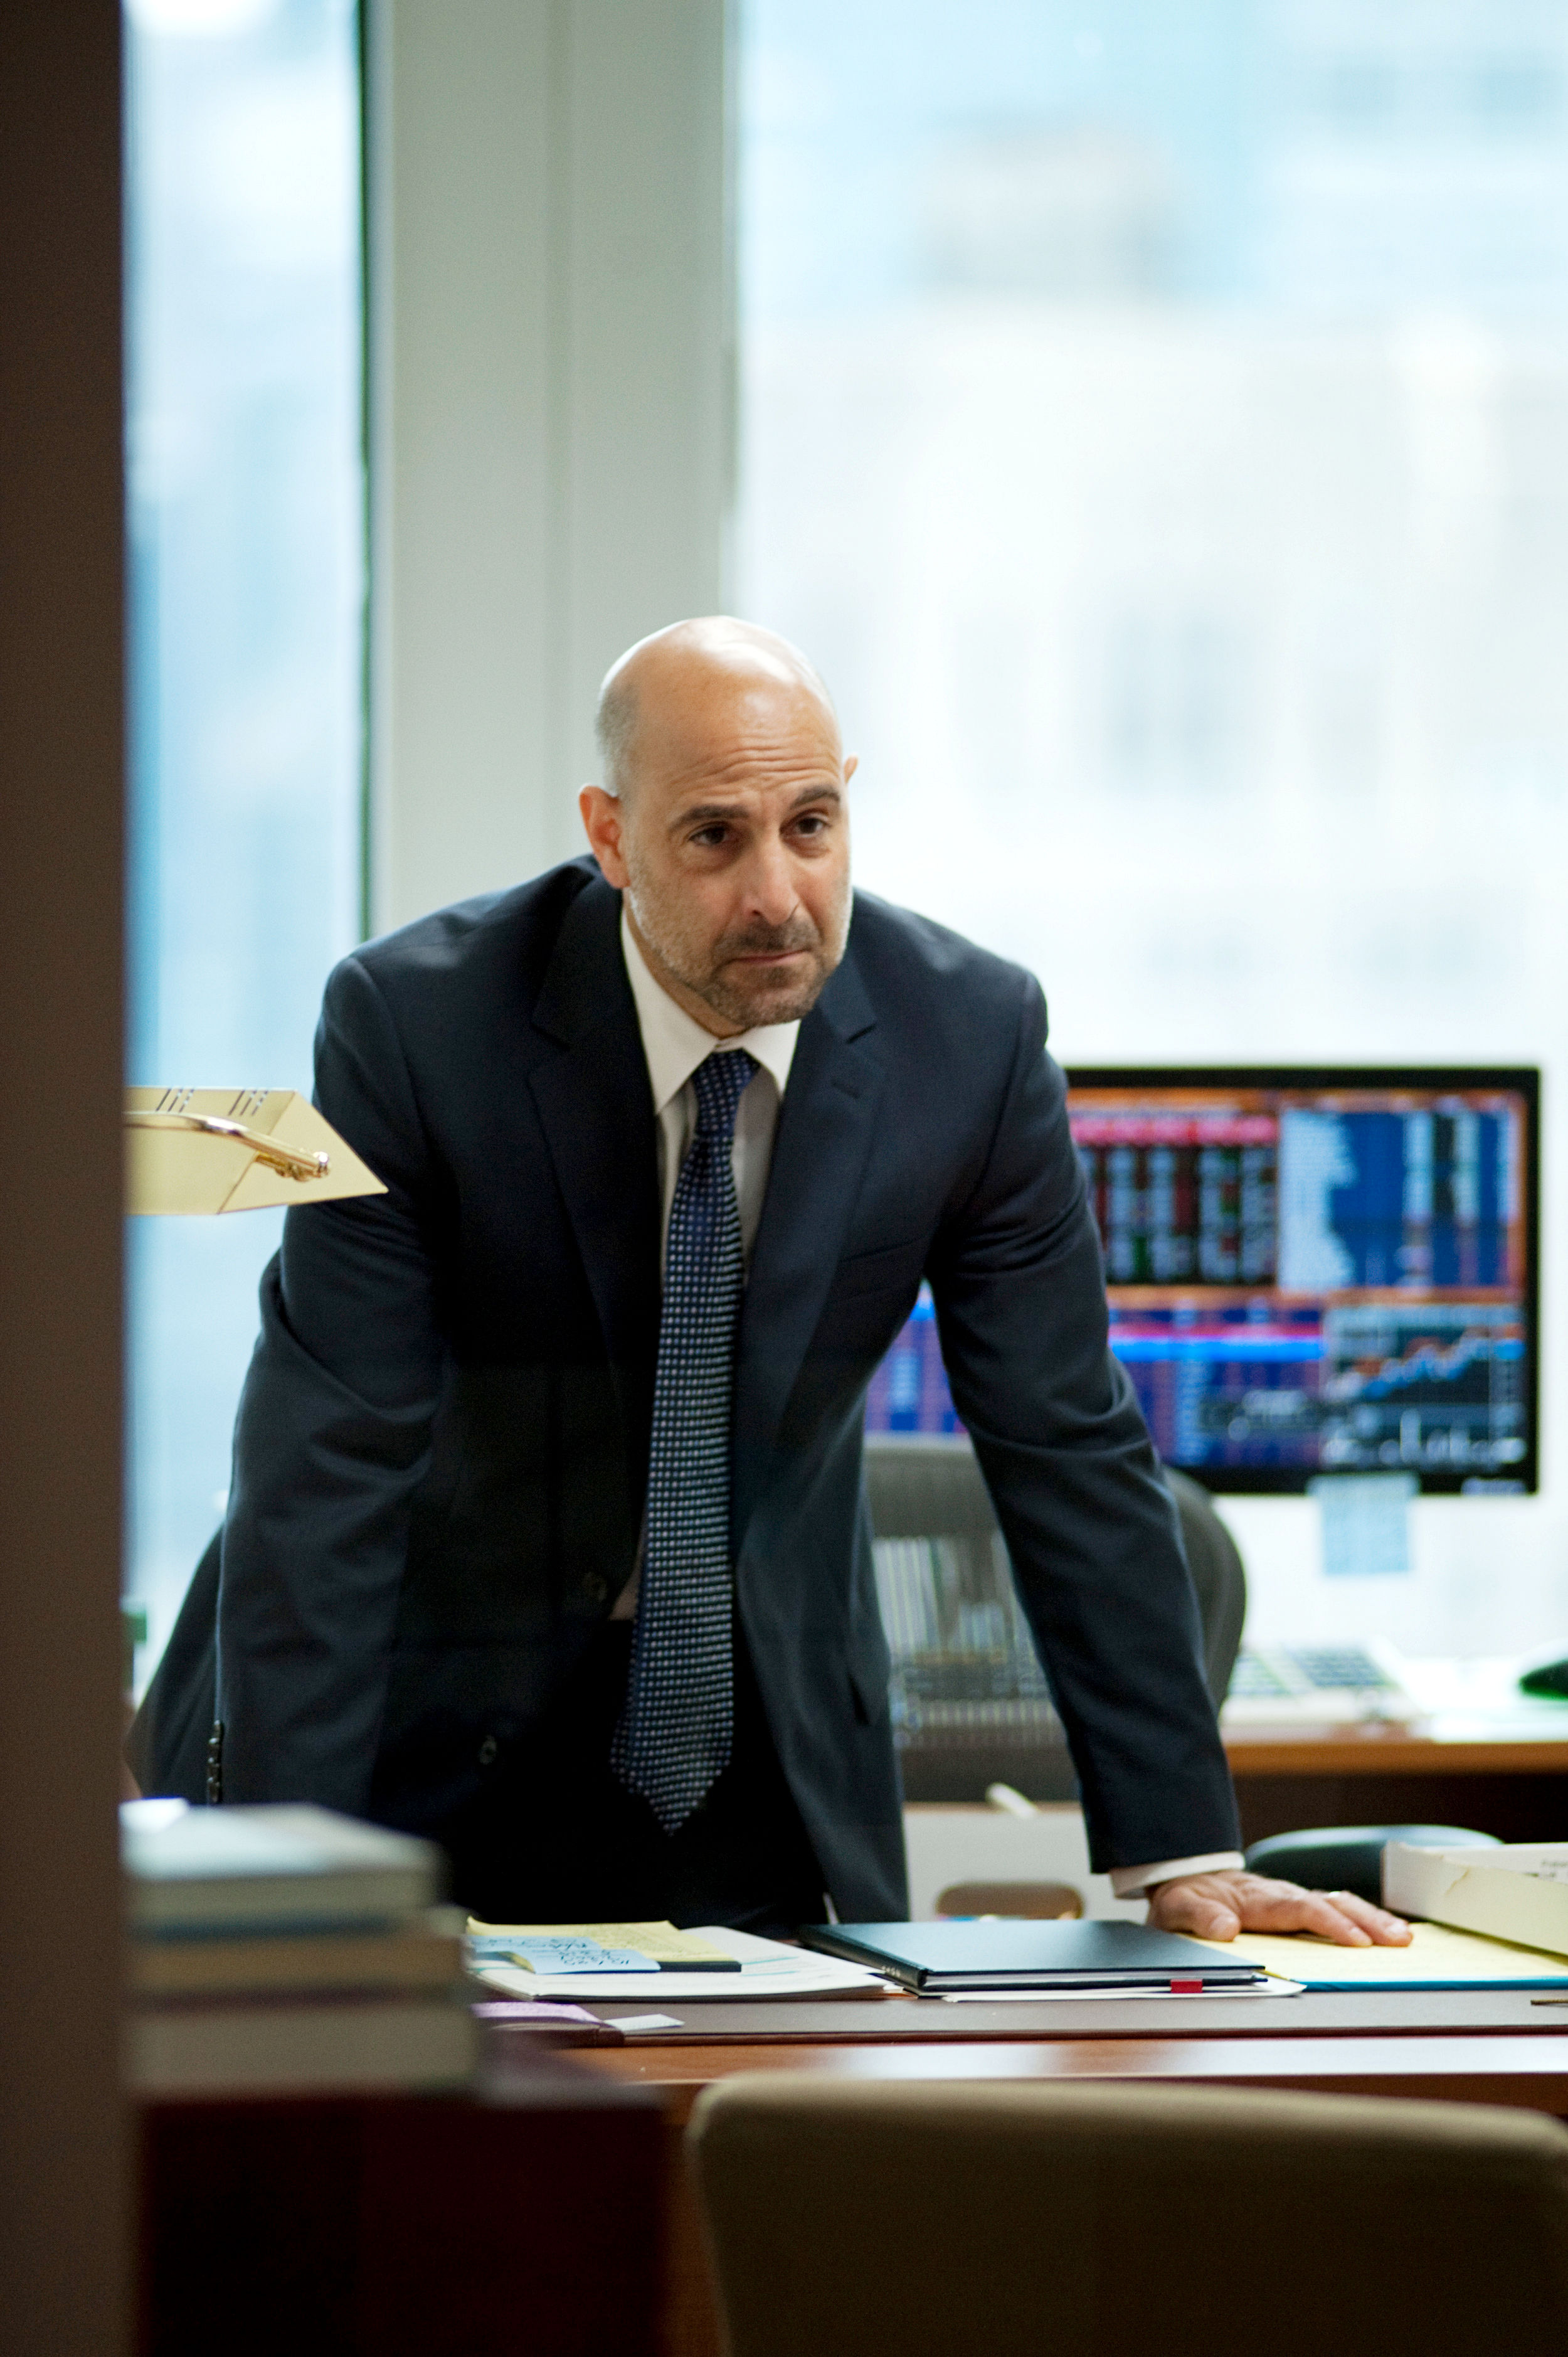 Stanley Tucci stars as Eric Dale in Roadside Attractions' Margin Call (2011)